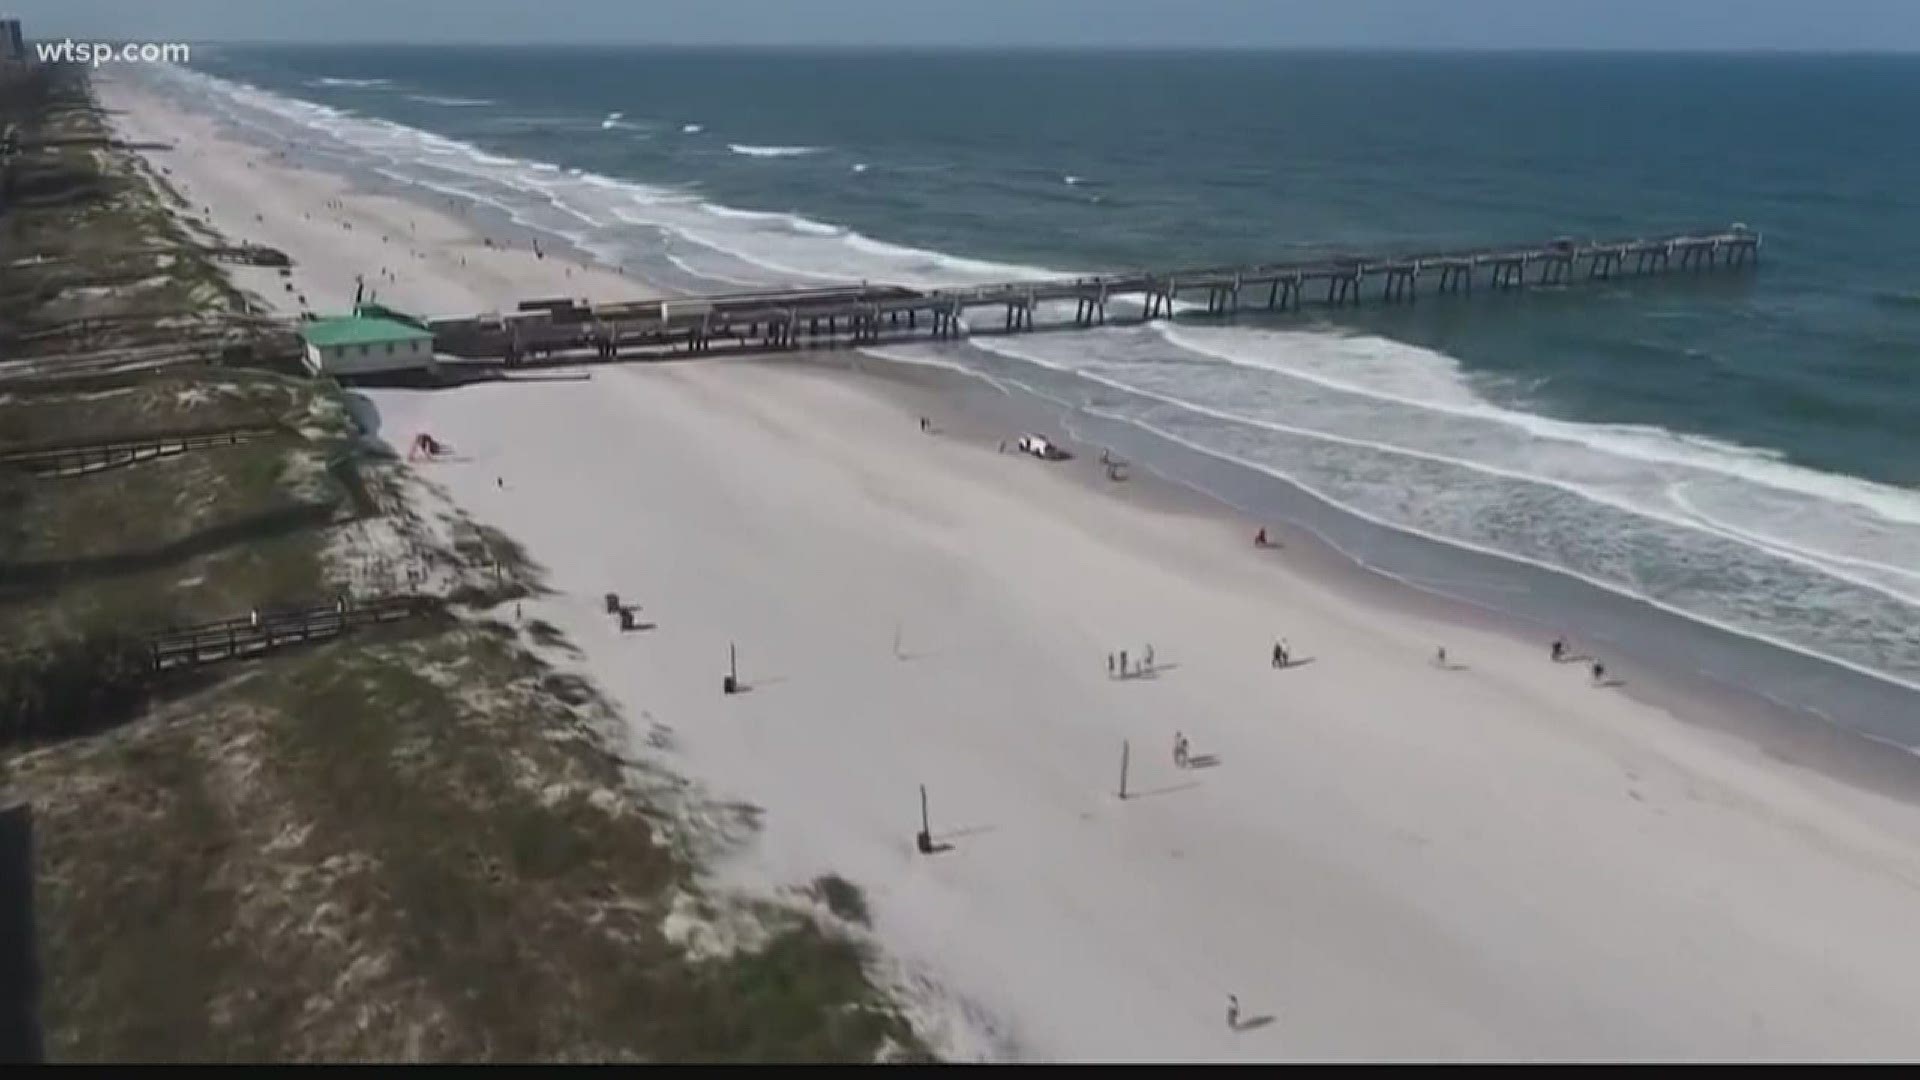 The re-opening of Jacksonville Beach might not have been warmly received on social media but measures taken there could set the tone elsewhere.